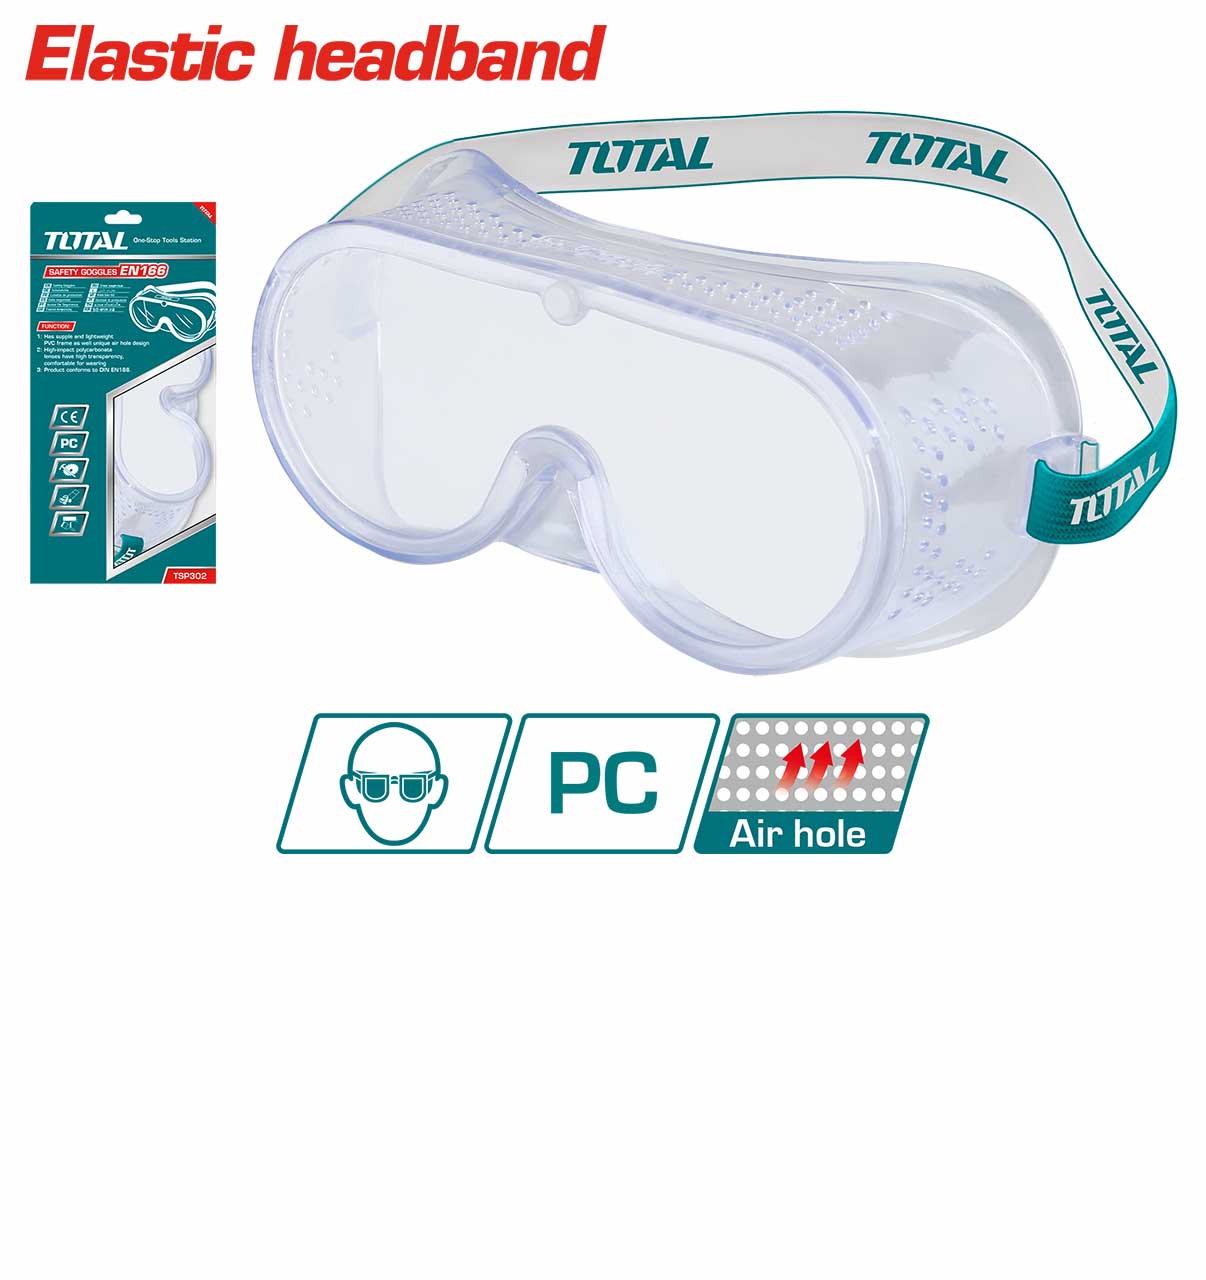 Total Safety Goggles Price in Pakistan